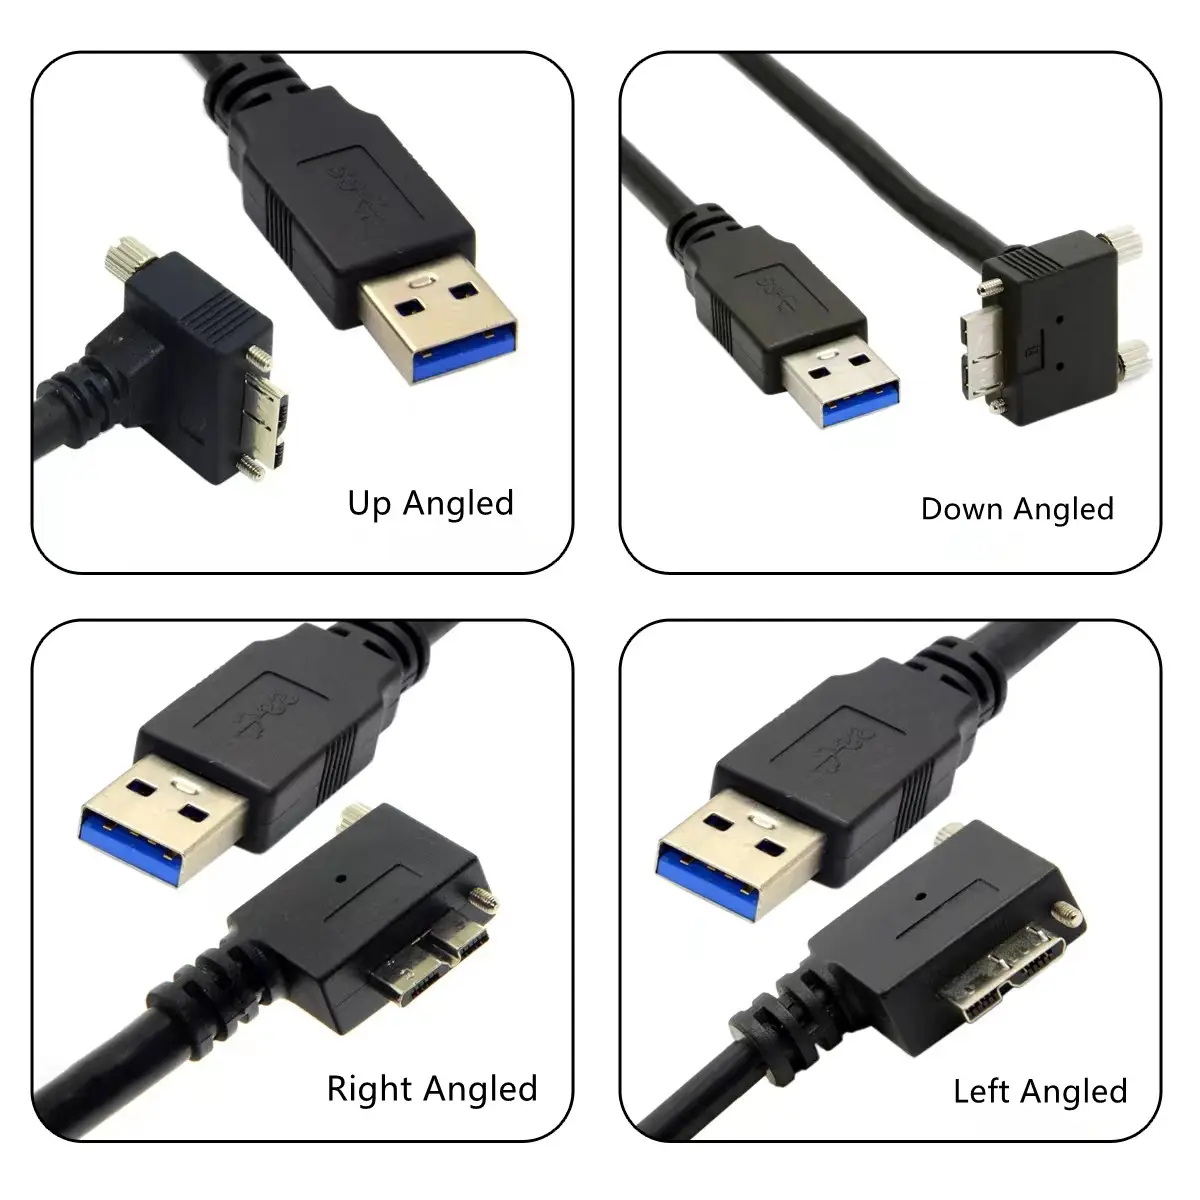 Industrial Used USB3 Cable For Machine Vision System Industrial Camera Link Digital Camera Data Cable Micro USB Screw Mount